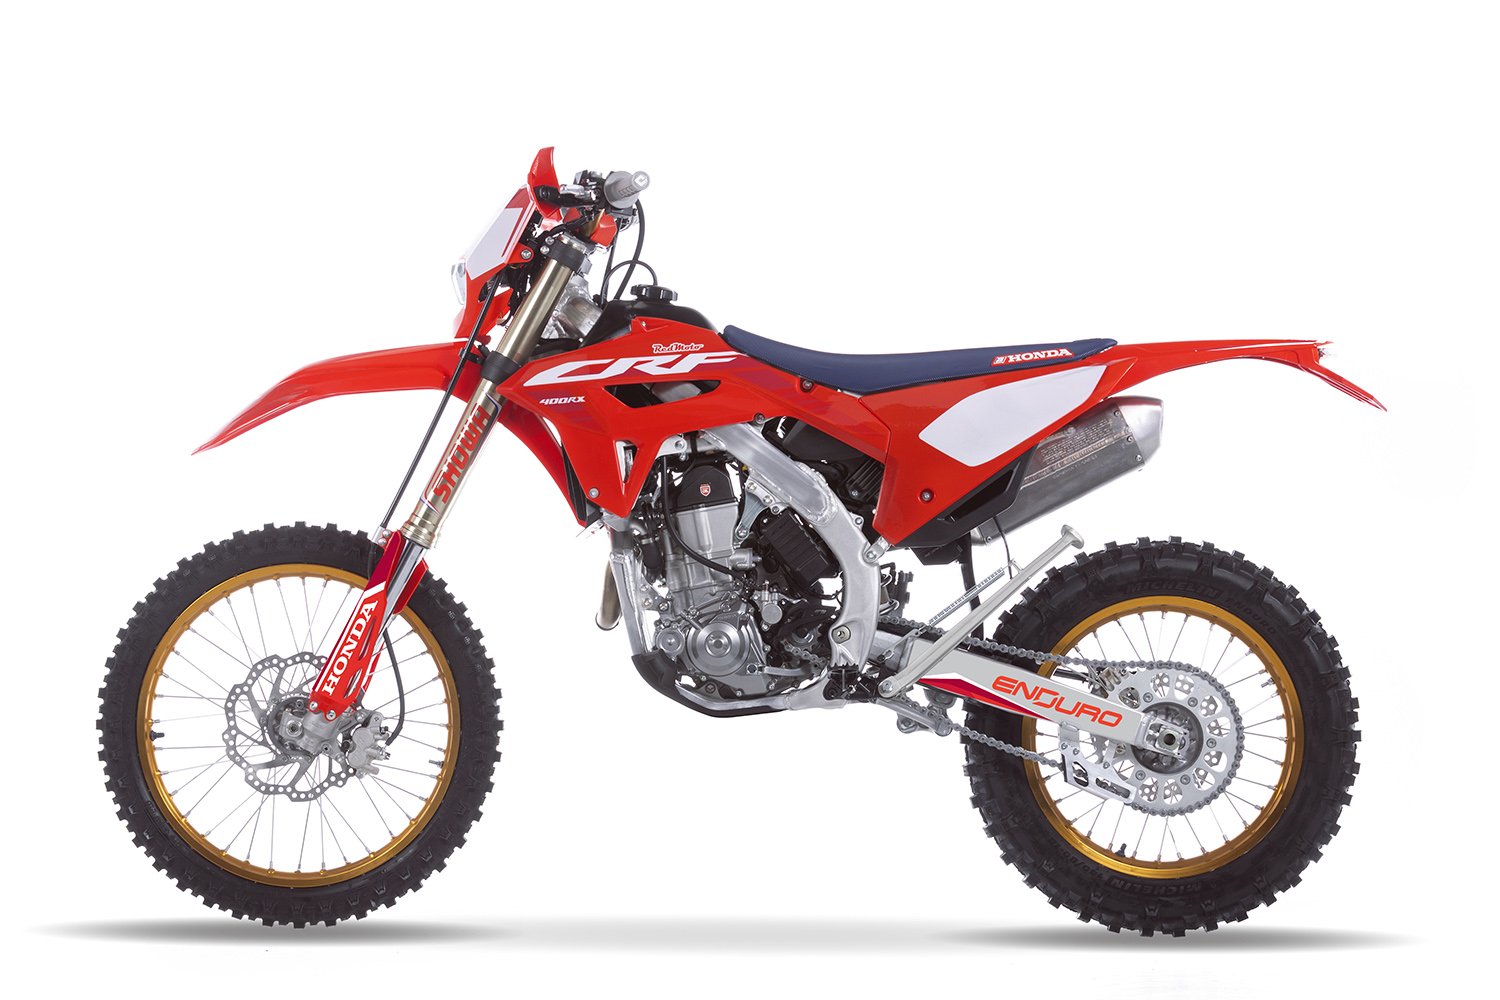 Watch This Guy Build His Own Honda CRF Electric Supermoto